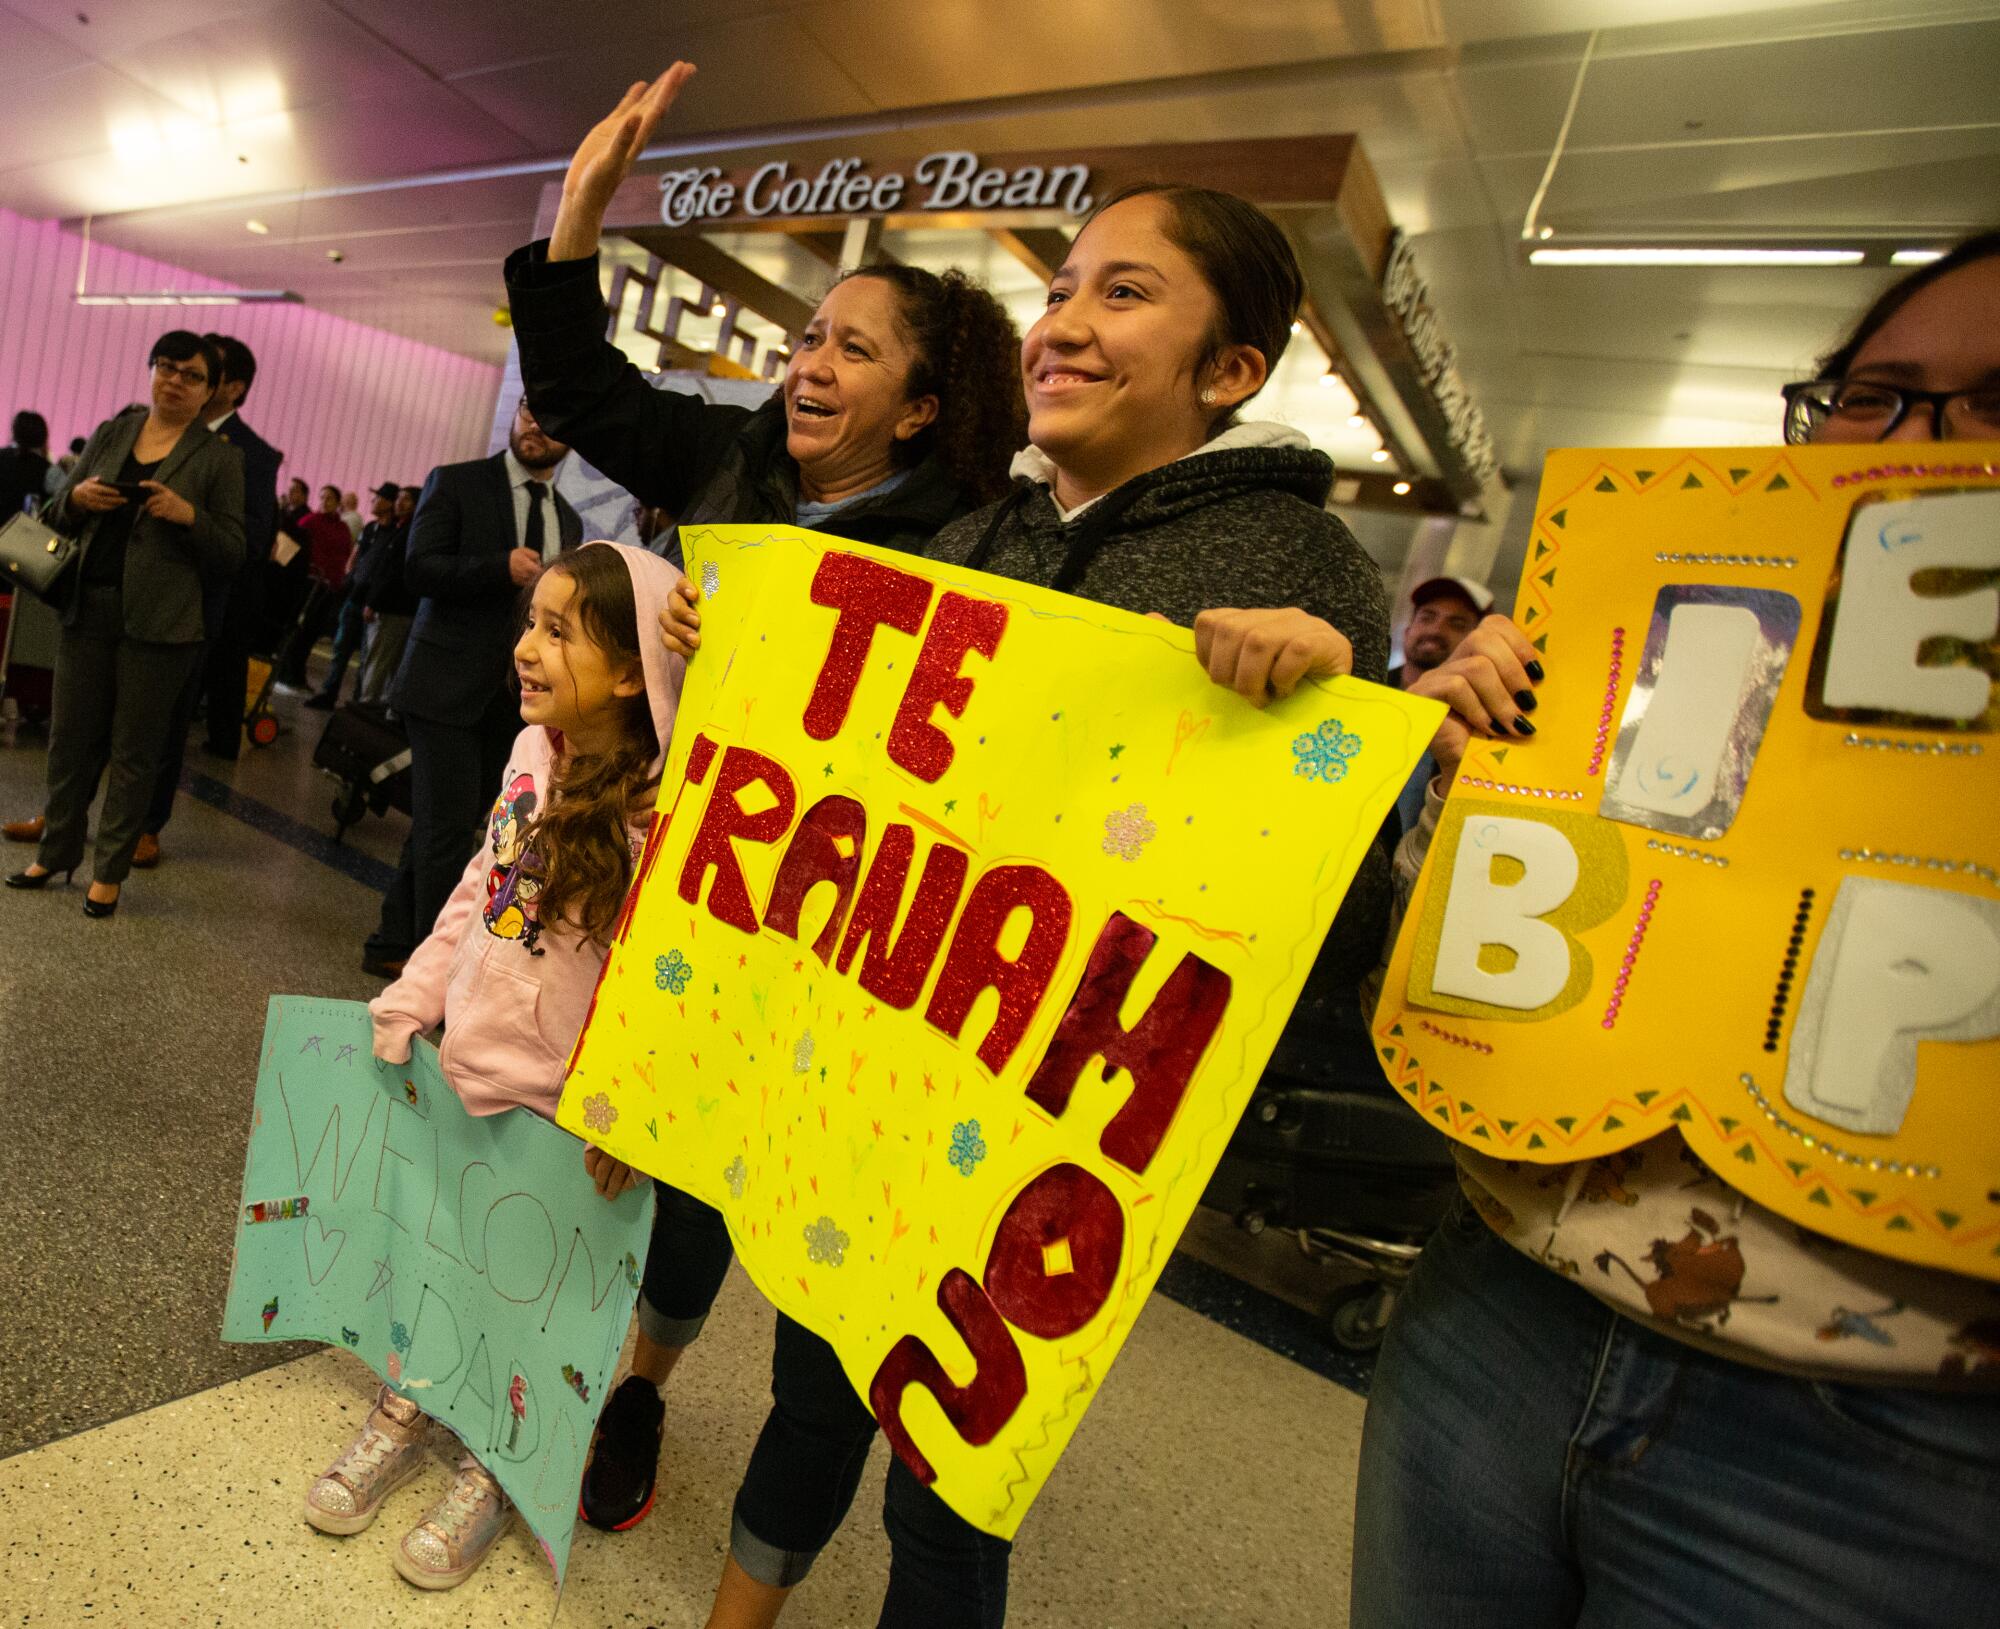 Family separation reunions at LAX